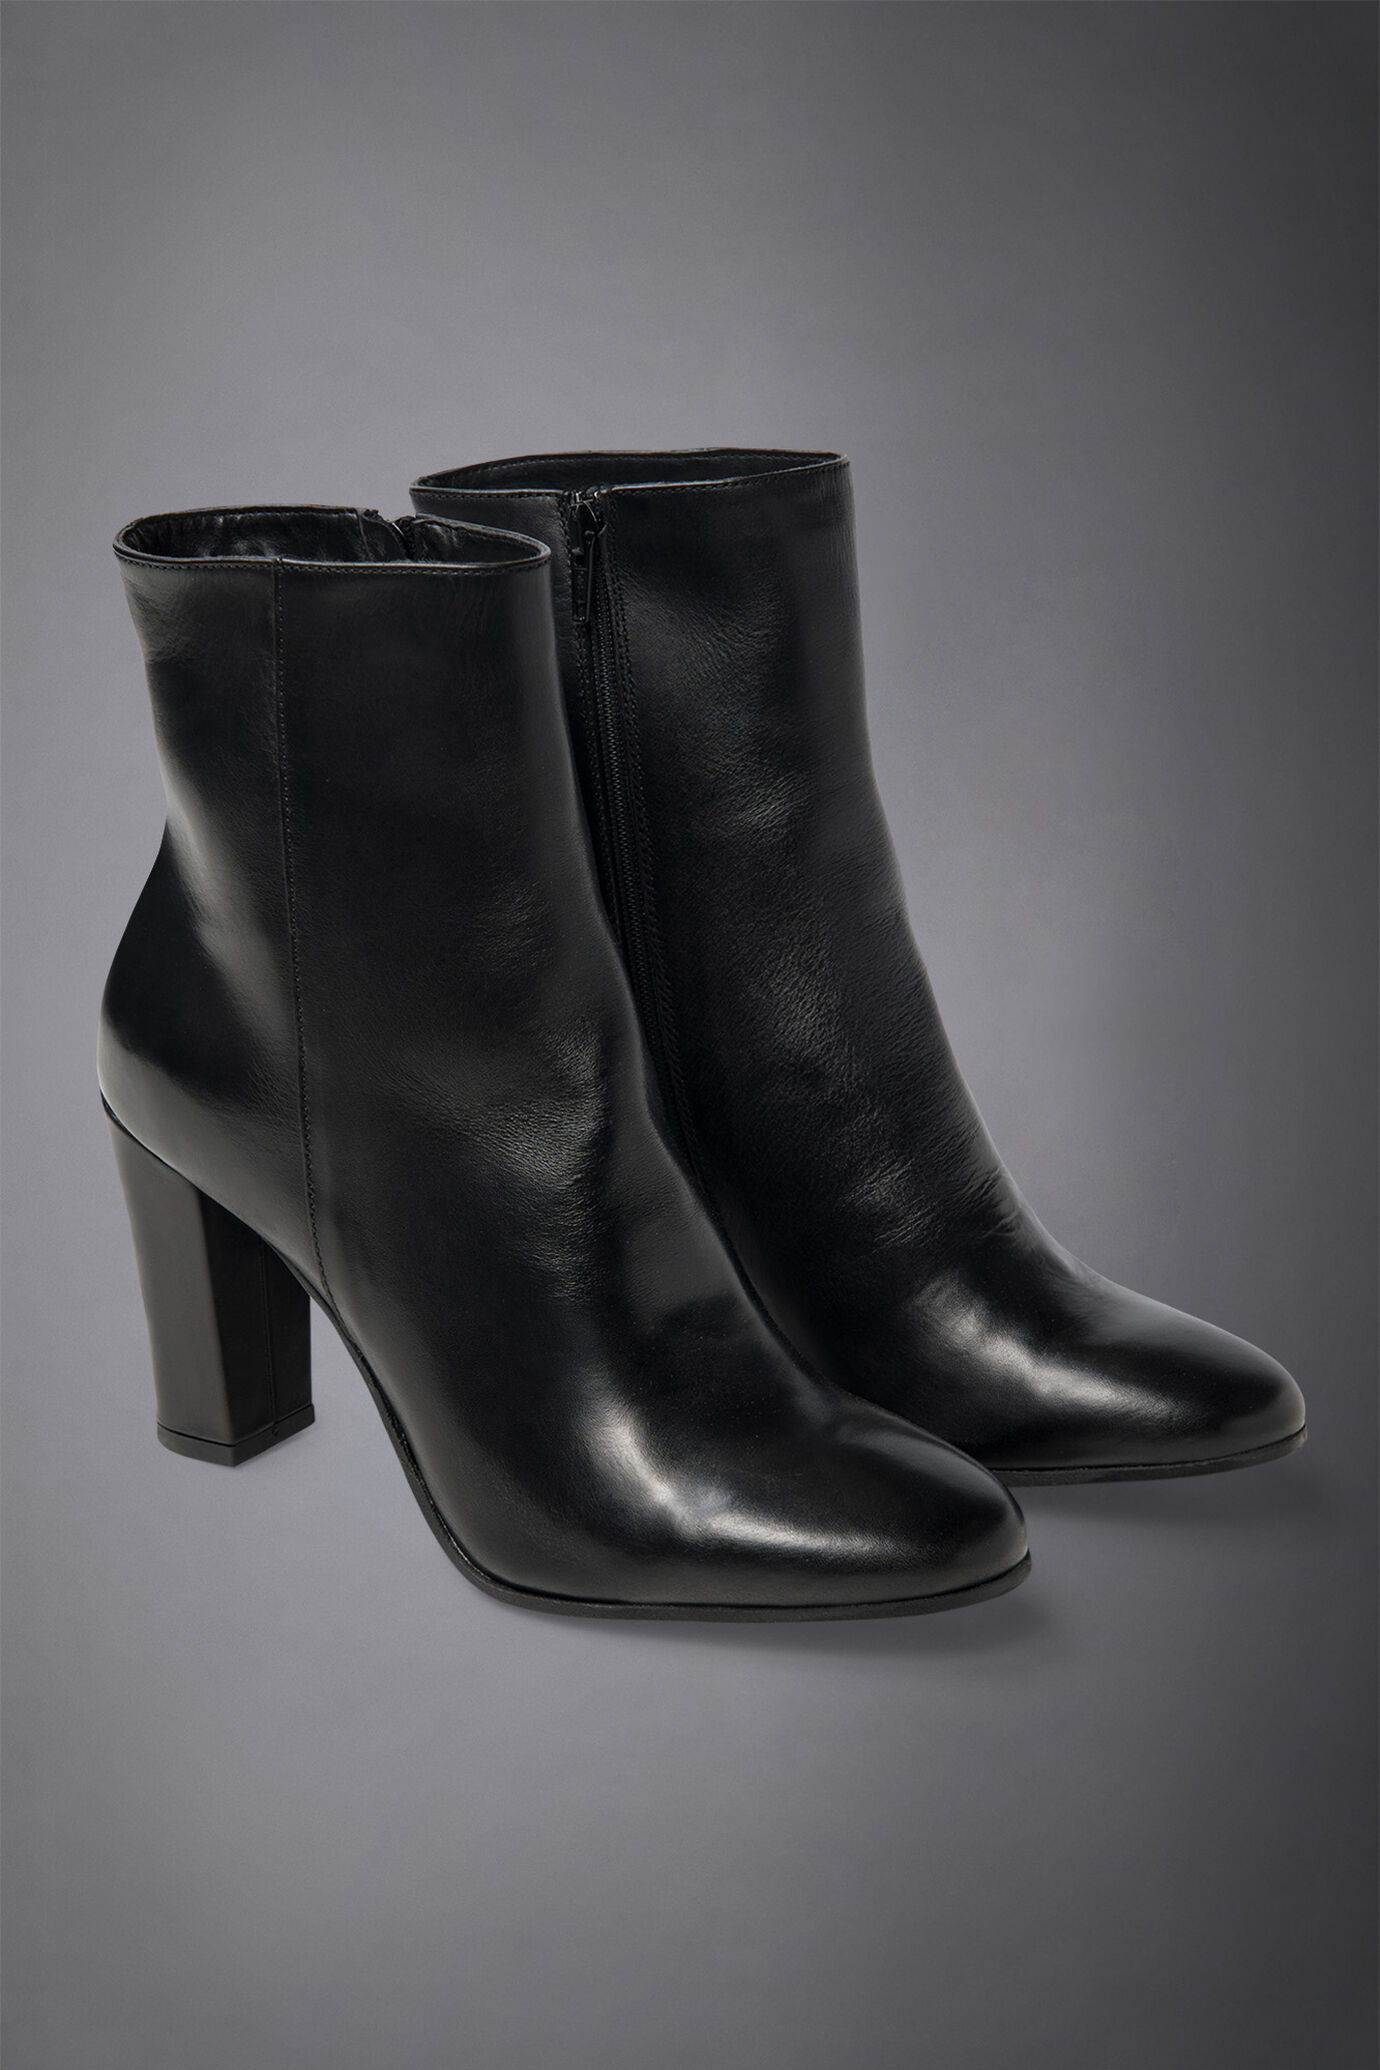 100% leather ankle boot